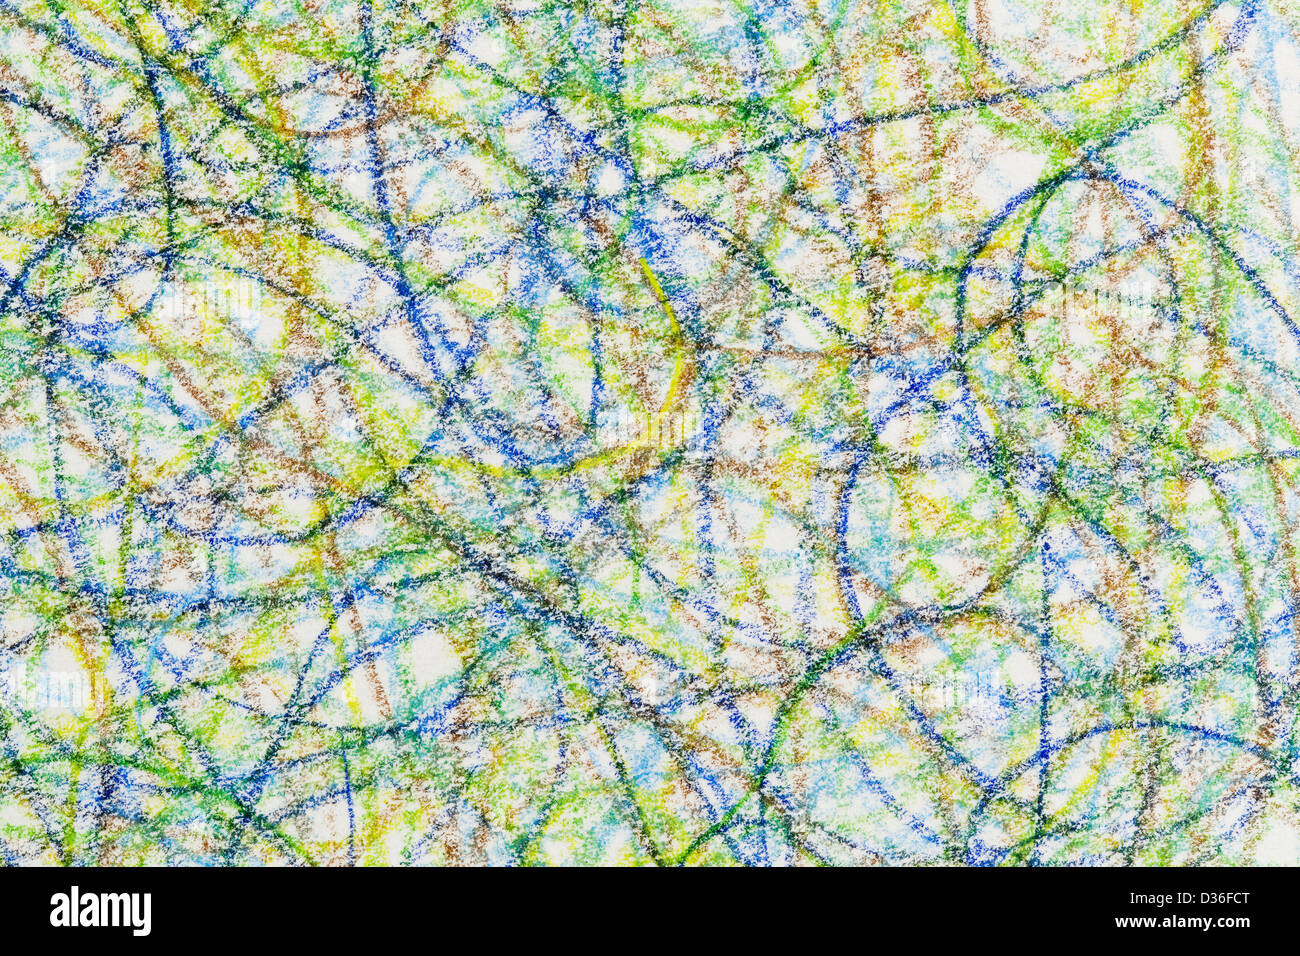 hand-drawn crayon scribble background in blue, green and brown colors Stock Photo